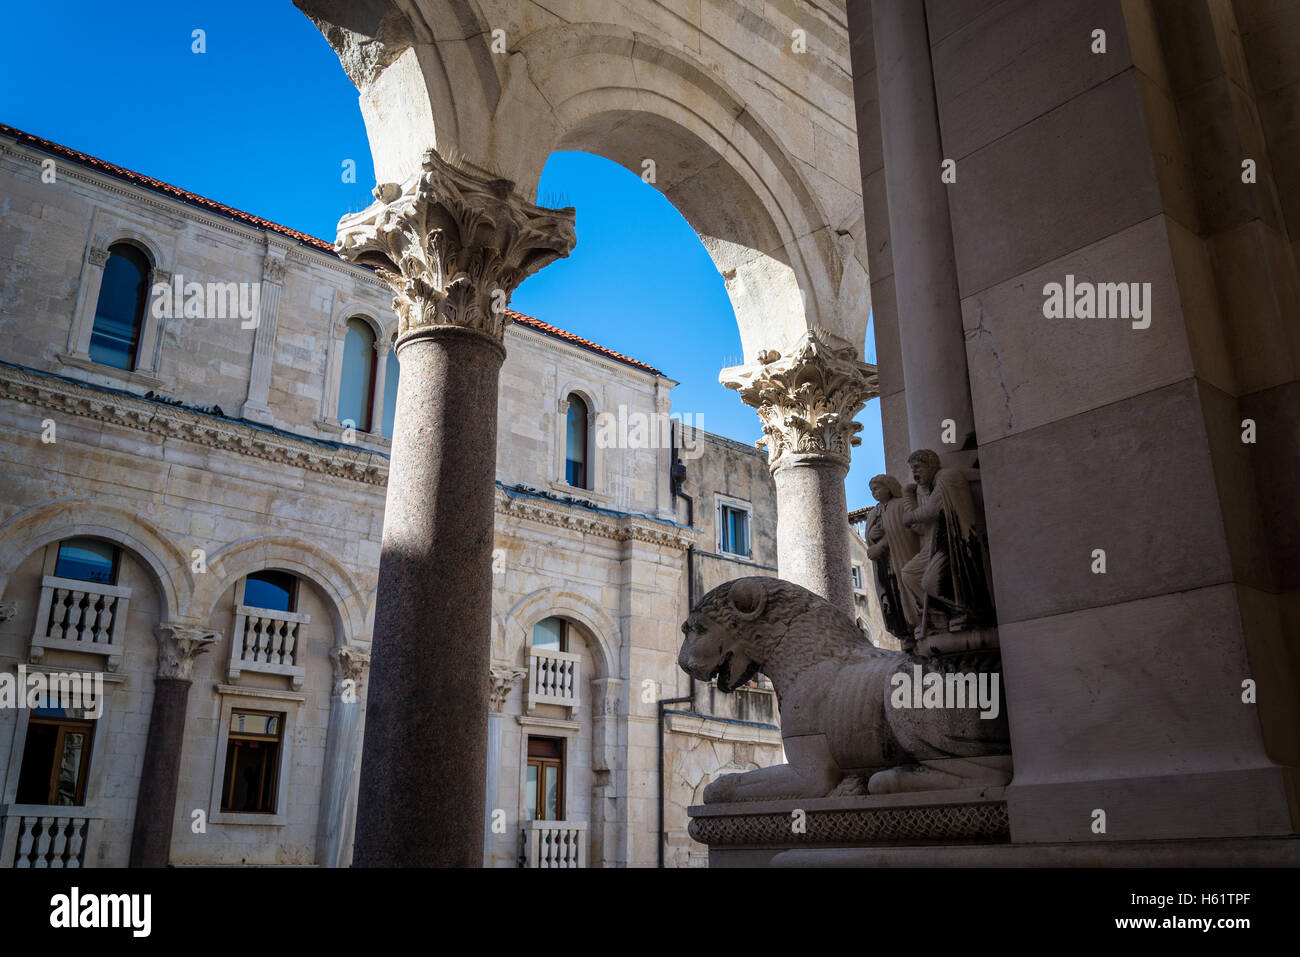 Romanesque sculpture of the Cathedral of Saint Domnius and Peristyle arches, Diocletian Palace, Split, Croatia Stock Photo